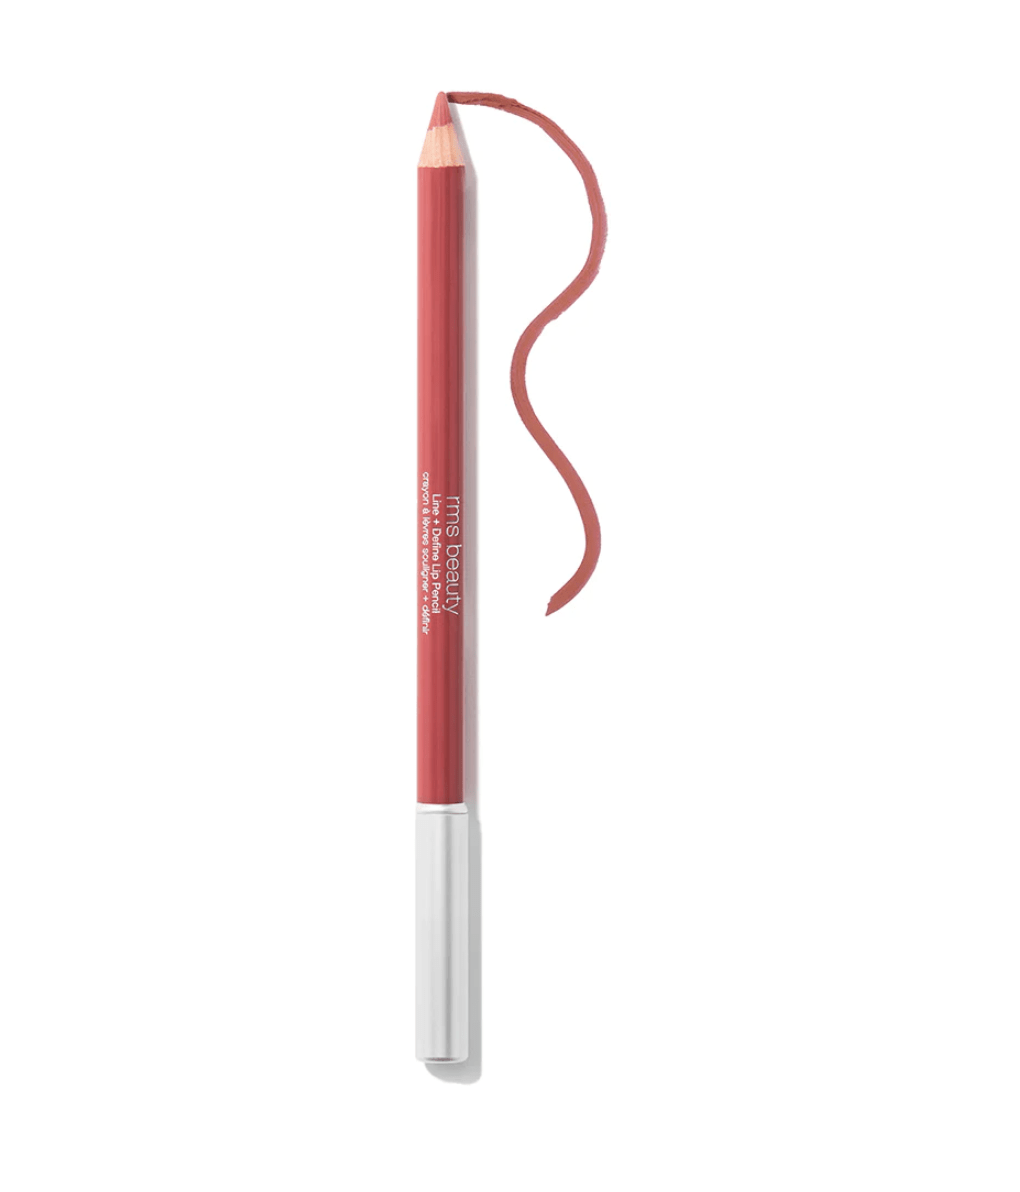 RMS - Go Nude Lip Pencil - The Natural Beauty Club